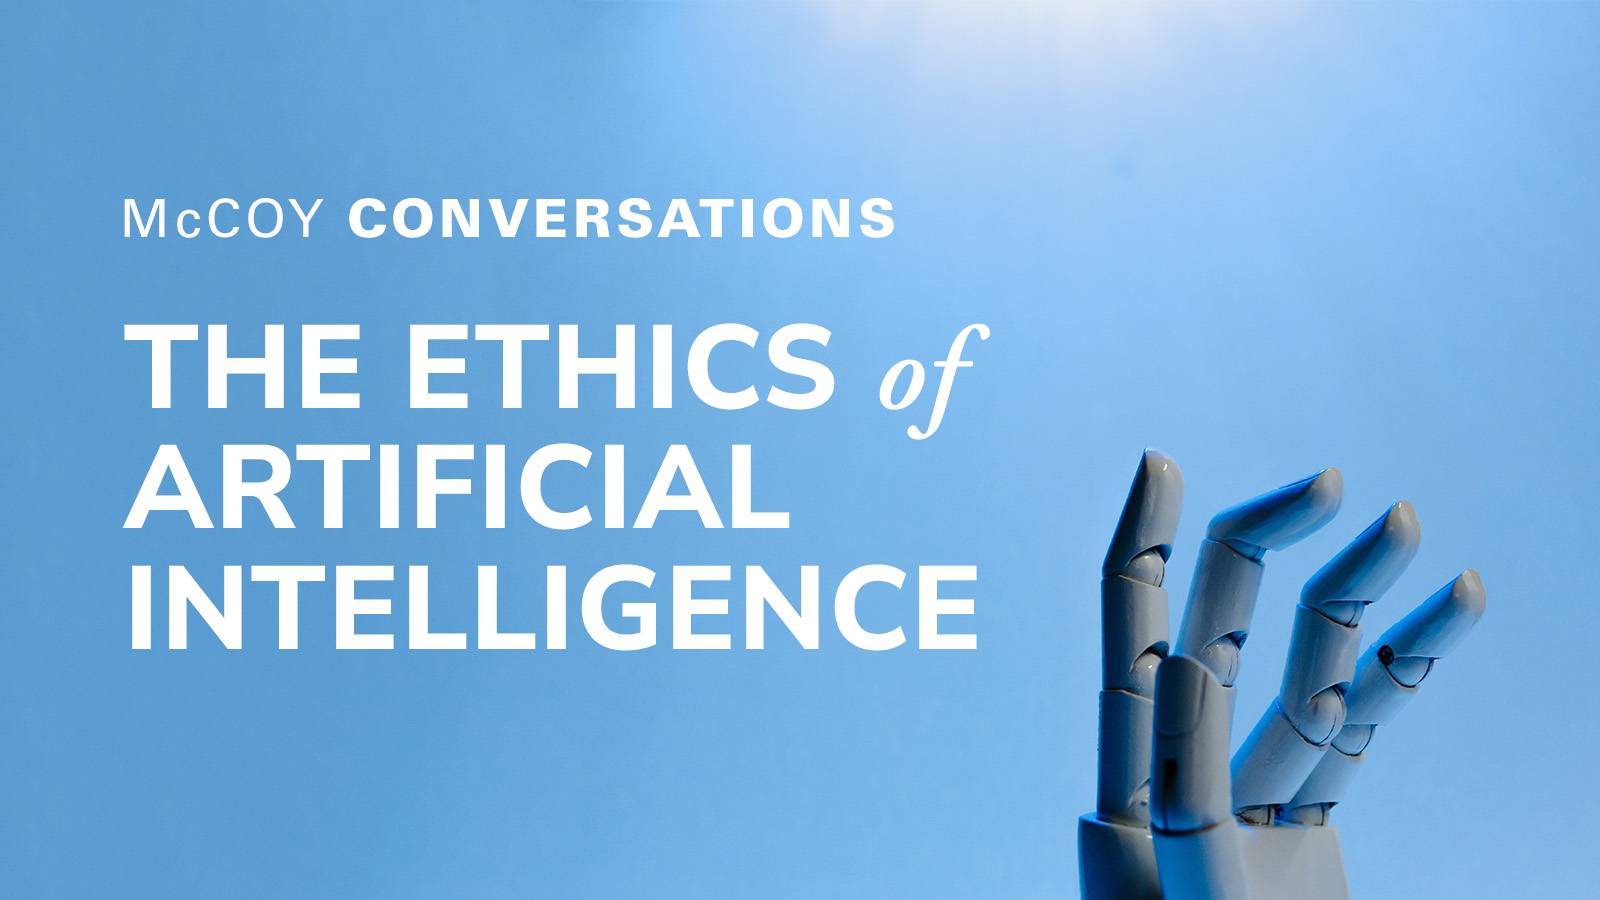 Robot hand reaching up on blue background with text "McCoy Conversations, the ethics of artificial intelligence"